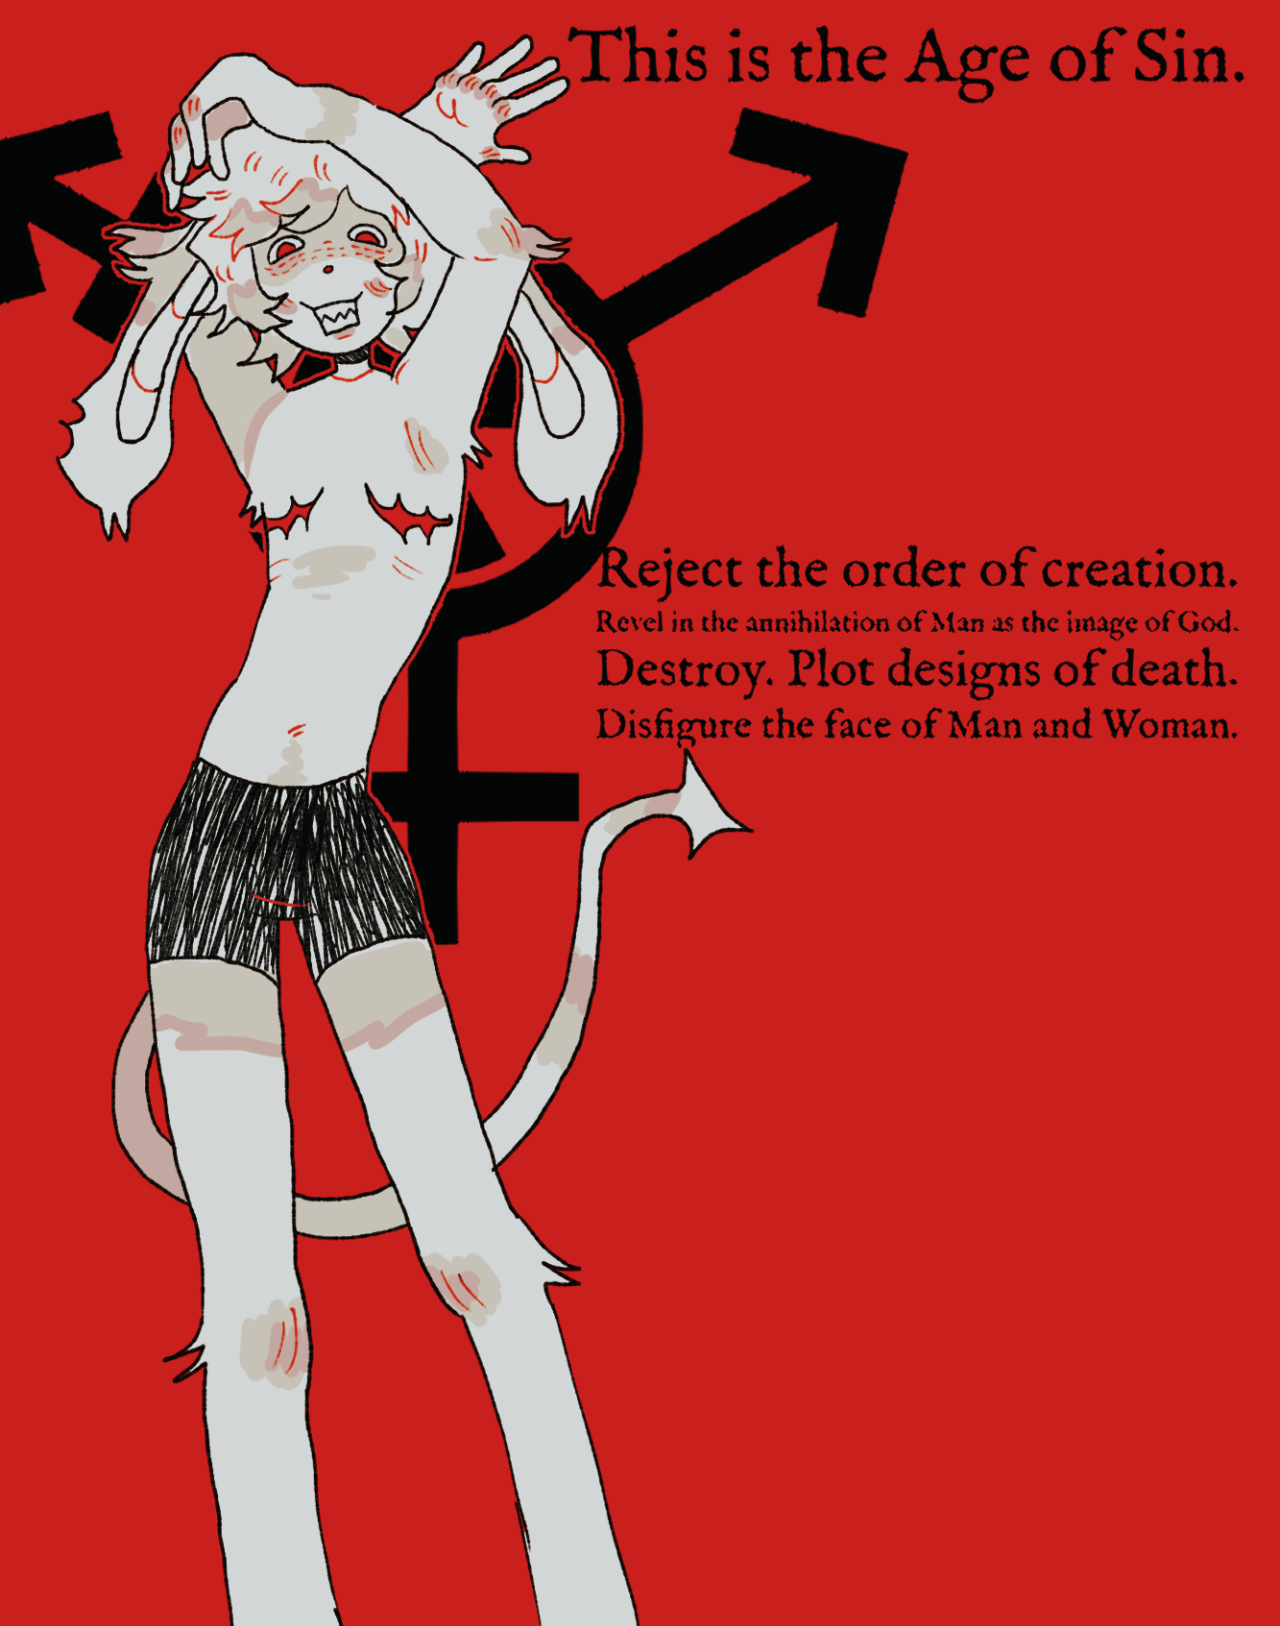 an anthropomorphic bunny person wearing only boxers. they have top surgery scars and a devil's tail, there is text beside them that reads: This is the Age of Sin. Reject the order of creation. Revel in the annihilation of Man as the image of God. Destroy. Plot designs of death. Disfigure the face of Man and Woman.